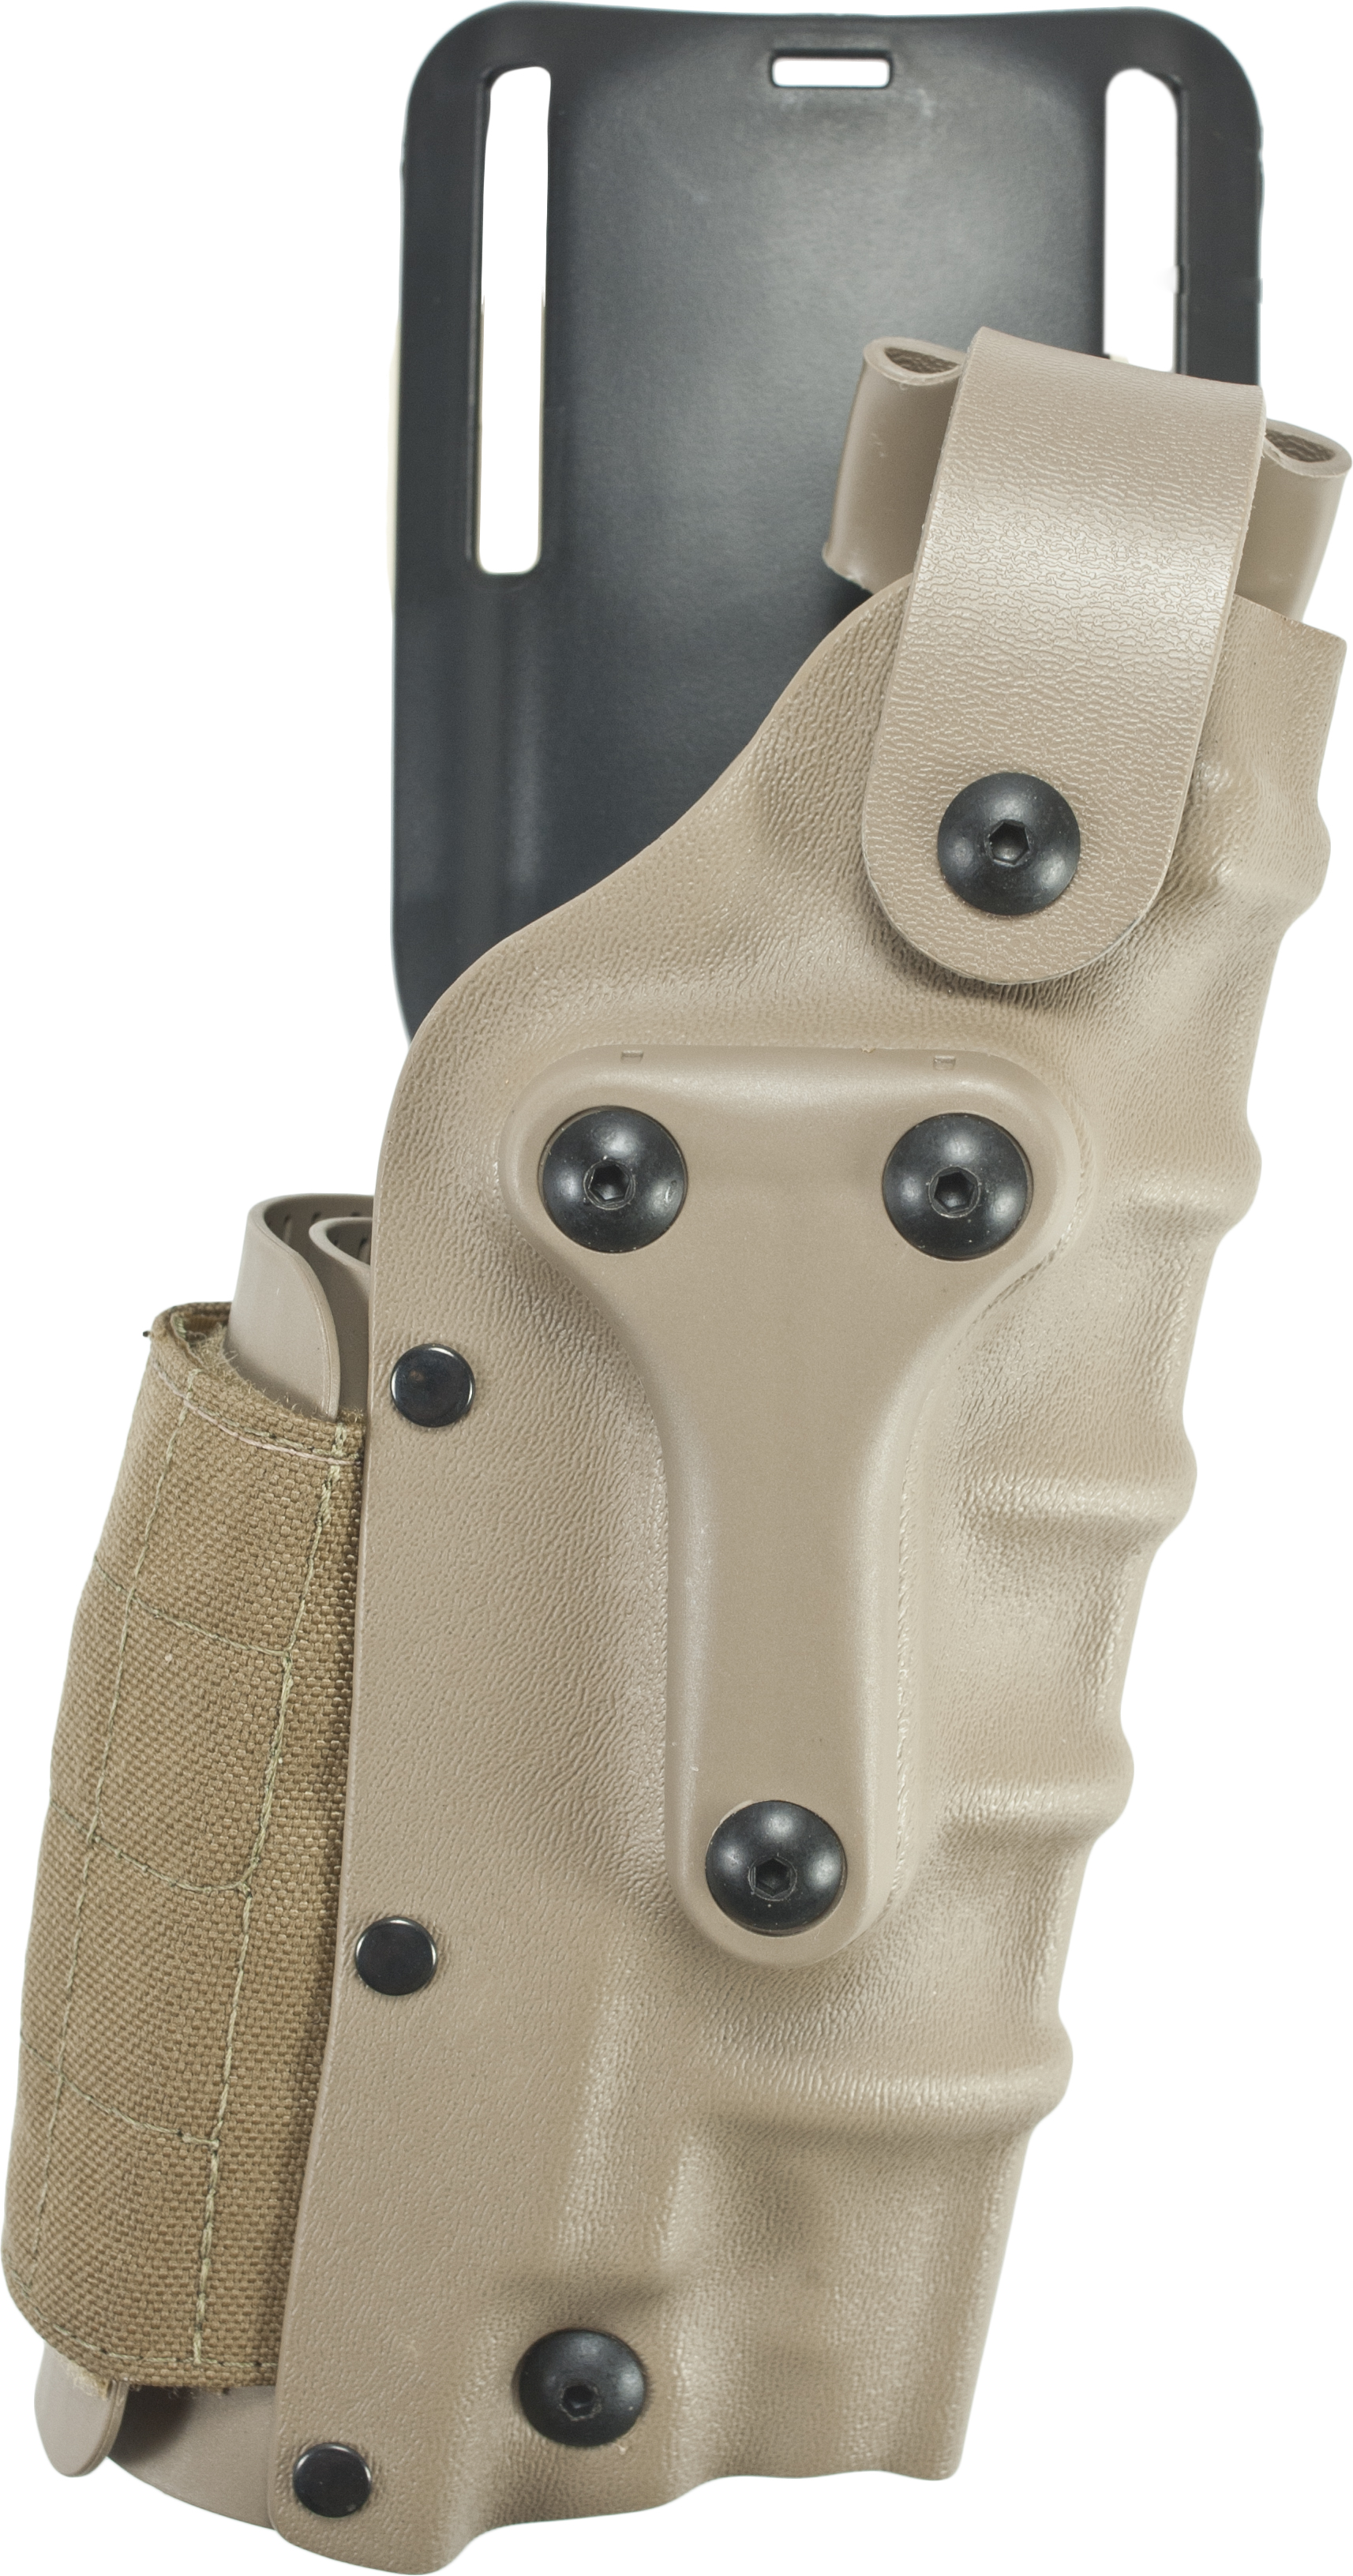 https://op2.0ps.us/original/opplanet-safariland-military-tactical-holster-stx-fde-brown-right-3285-73-551-main